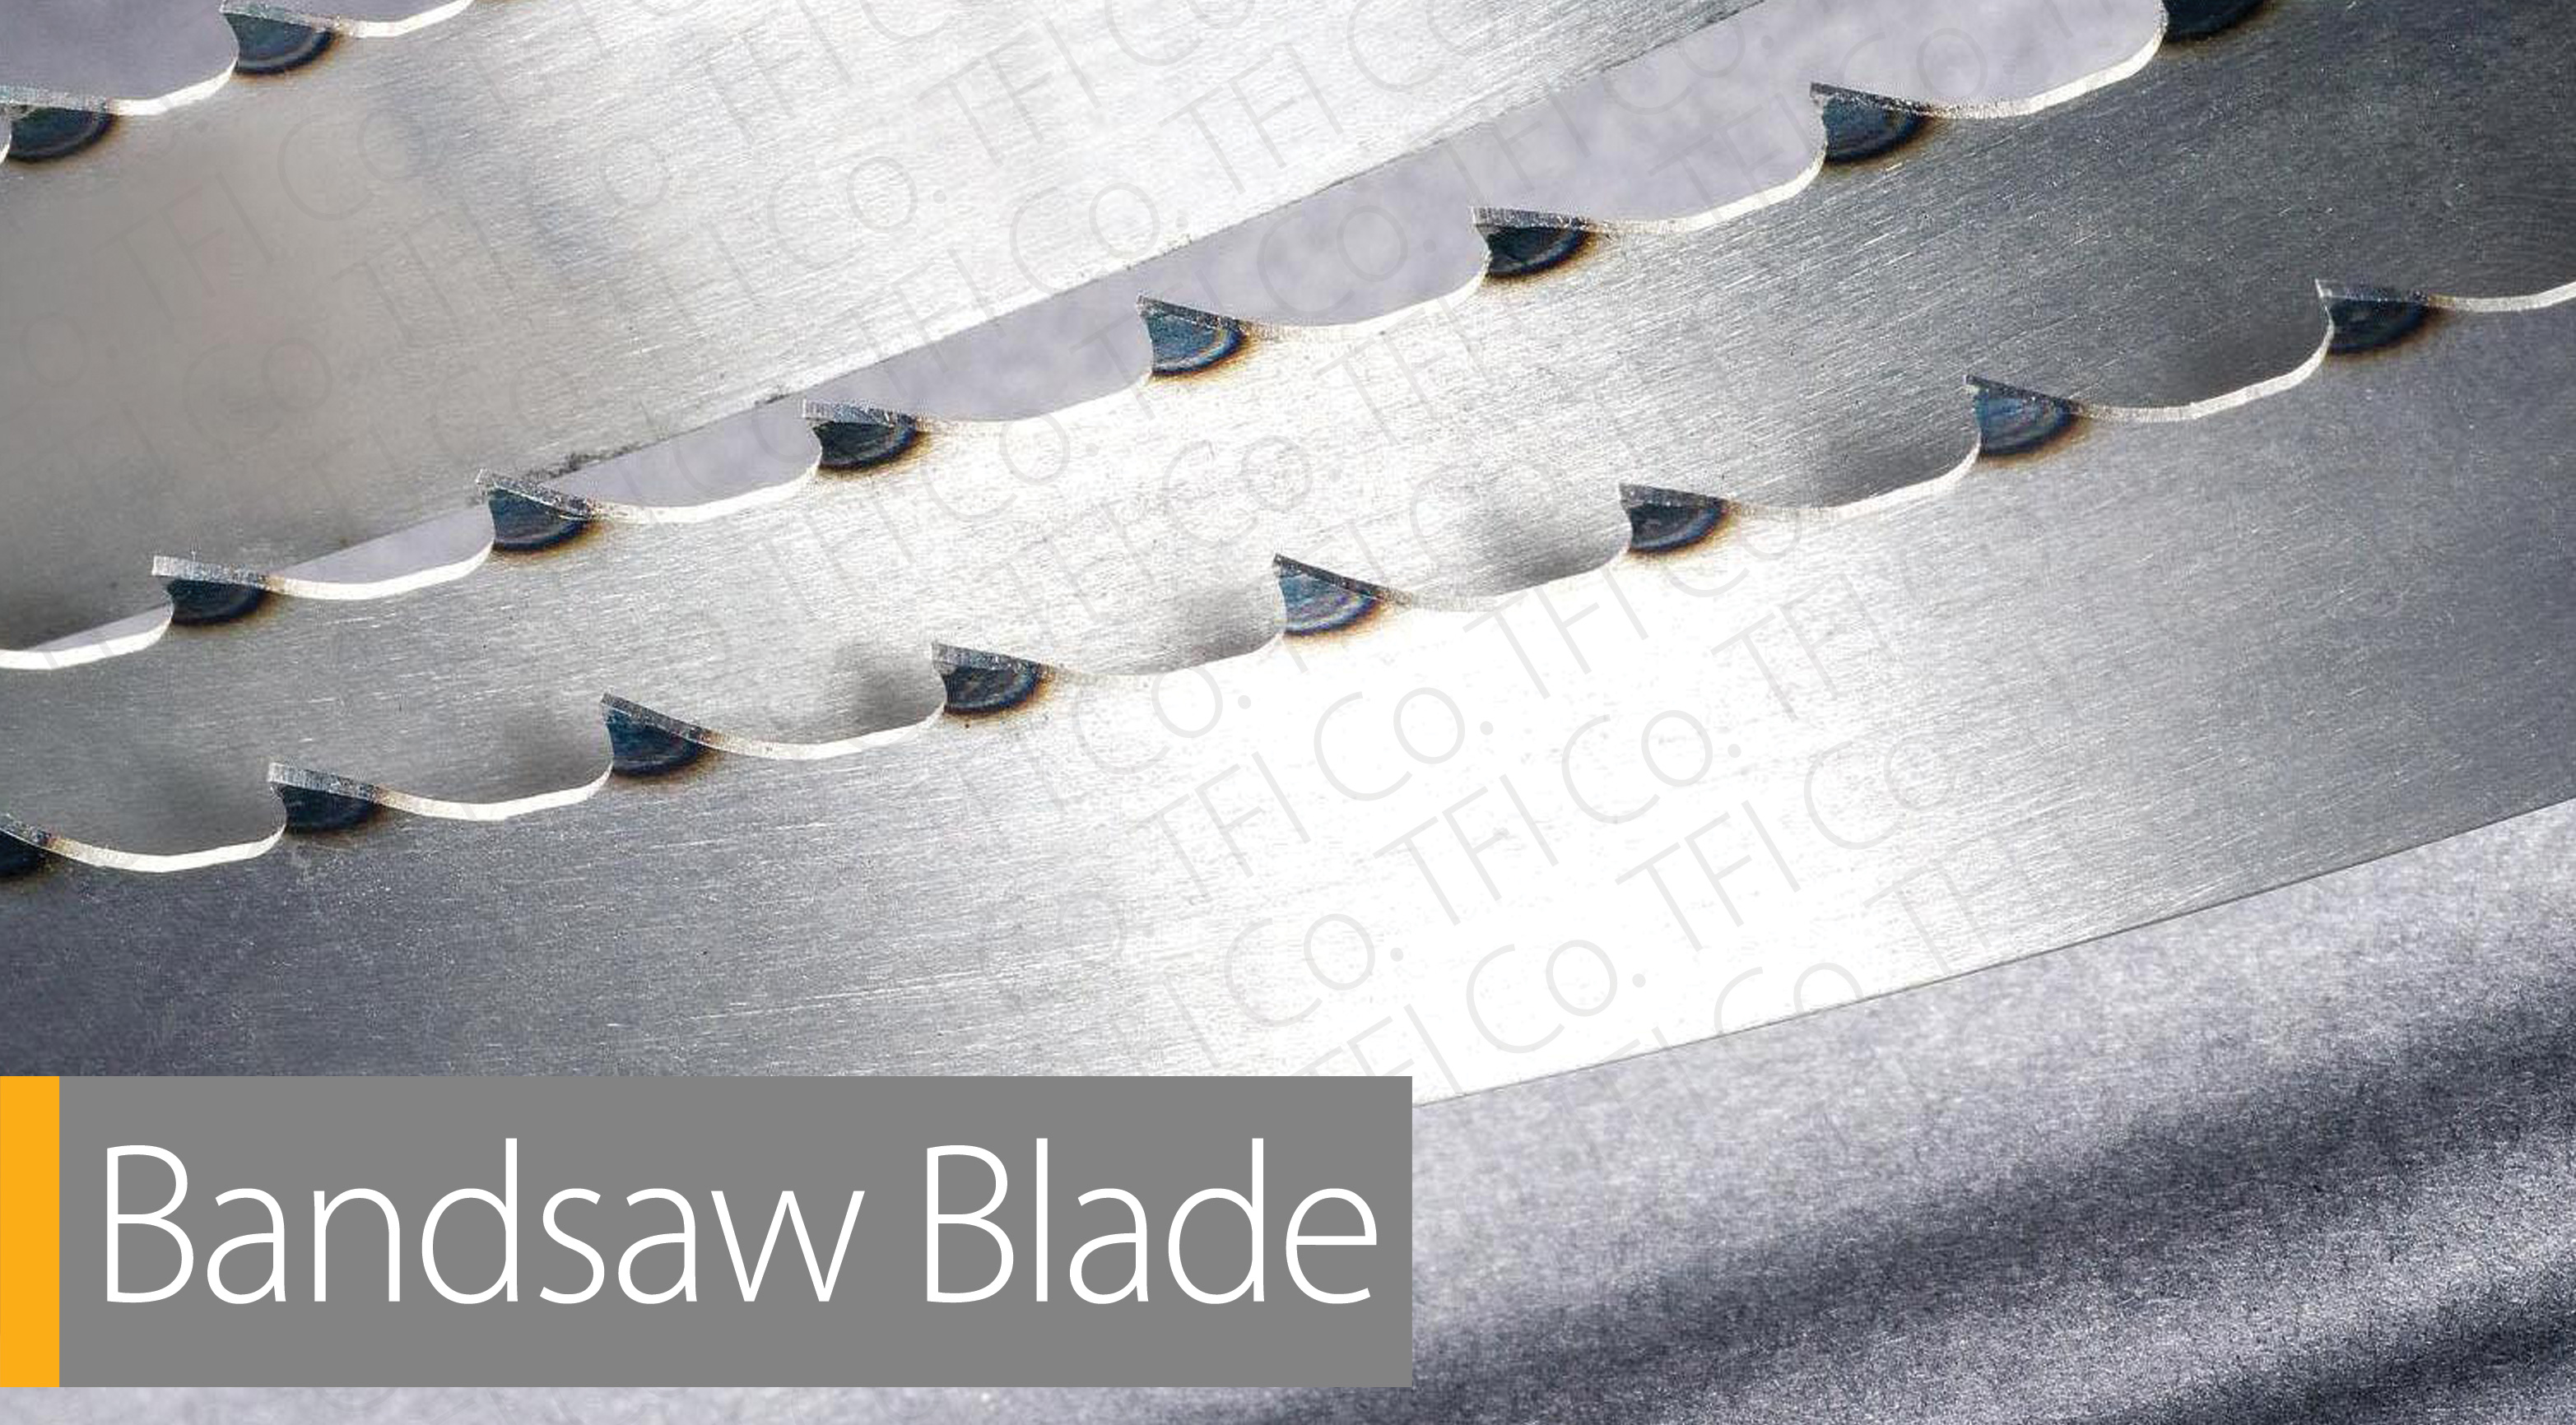 BT_Slider_simple04, bandsaw blades, band blade, band bled , and metal working saw blades,  Progressive Die TFI Co, Steel Blades manufacturer Bending tools and Press Braking Punch and die shear Blades and Machine knives in UAE and Saudi Arabia , Belarus an